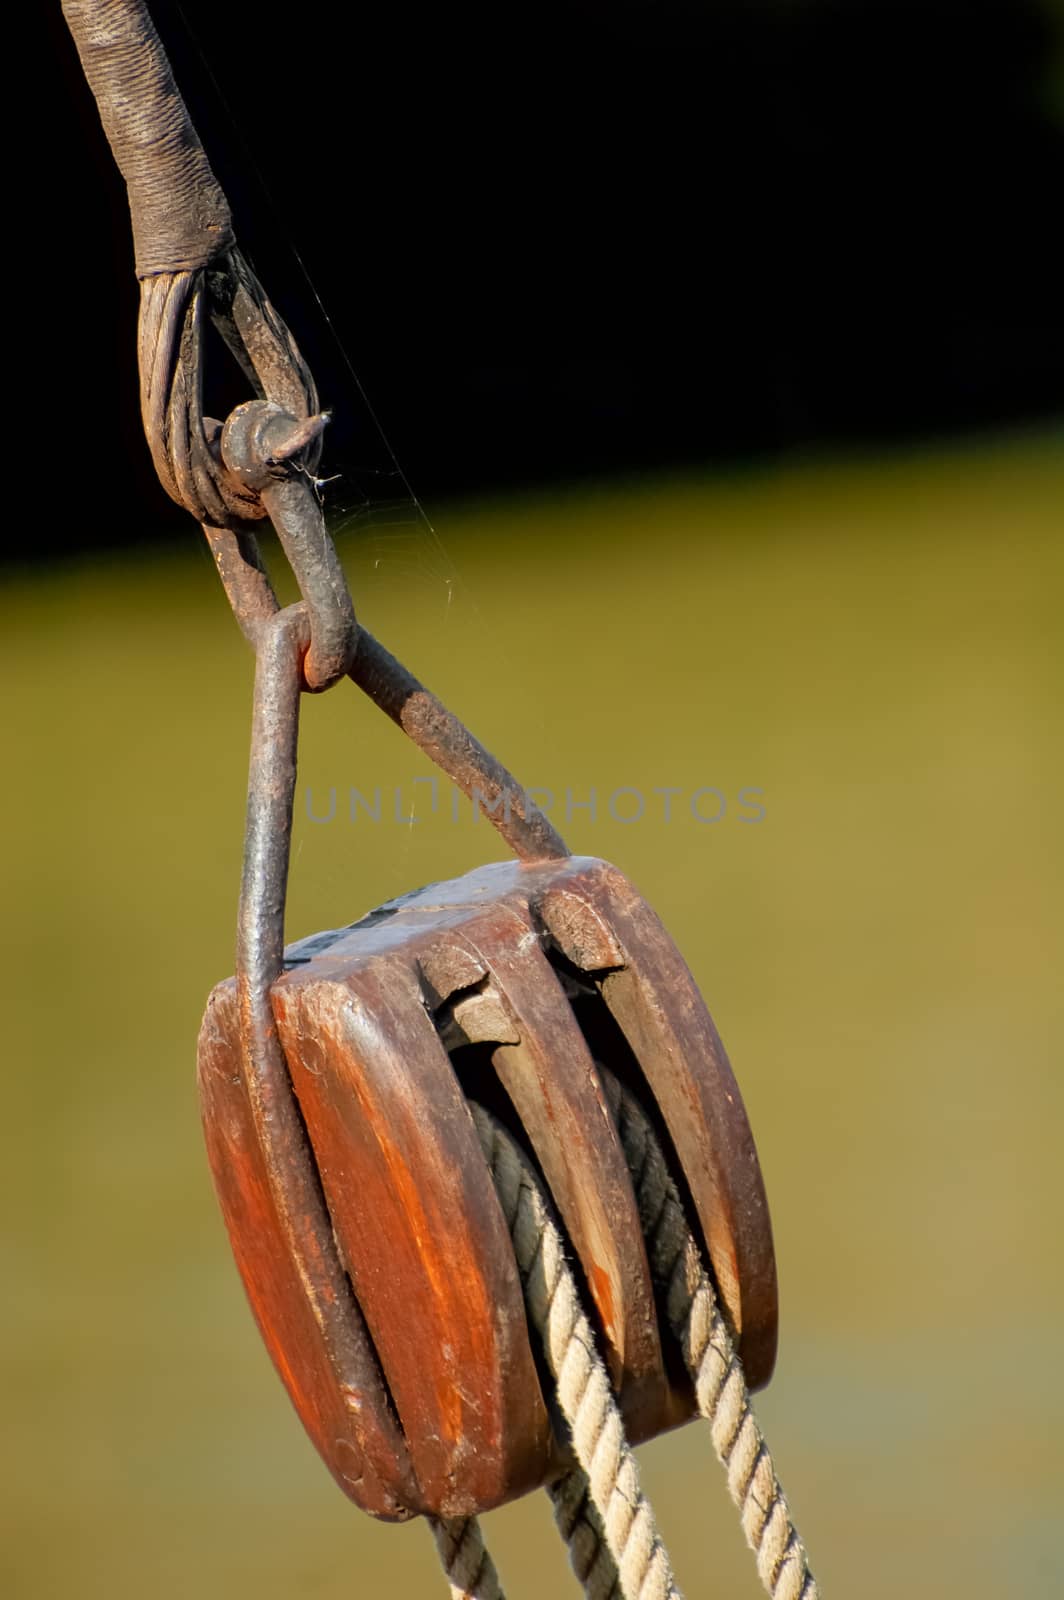 antique block and tackle lifting equipment on an old sailboat